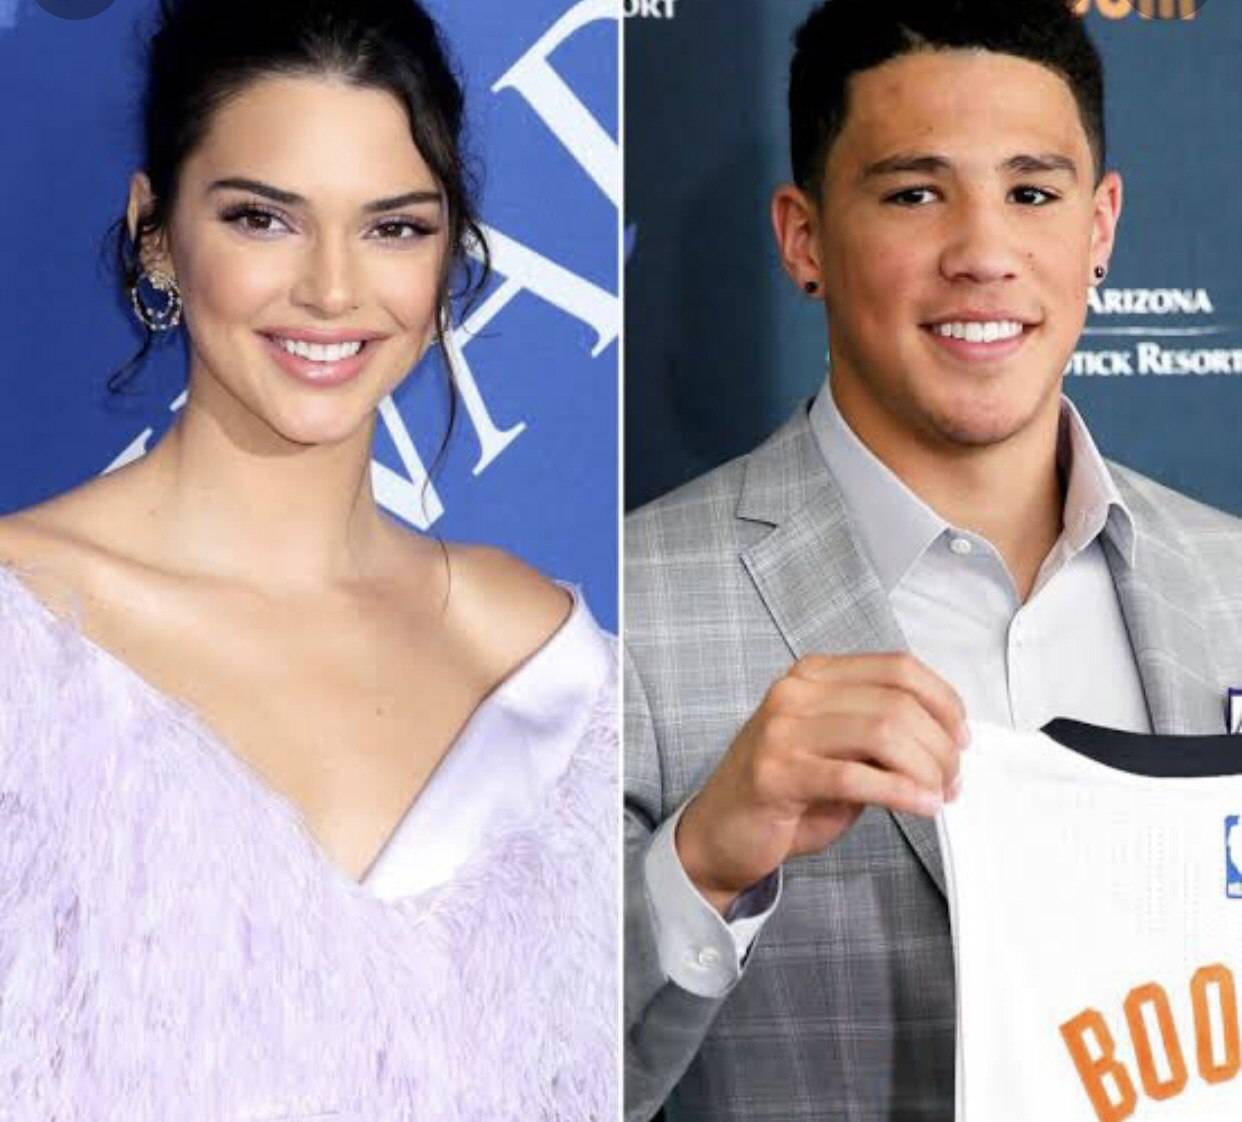 Kendall Jenner and Devin Booker 'Have Fallen Hard' for Each Other, Source Says